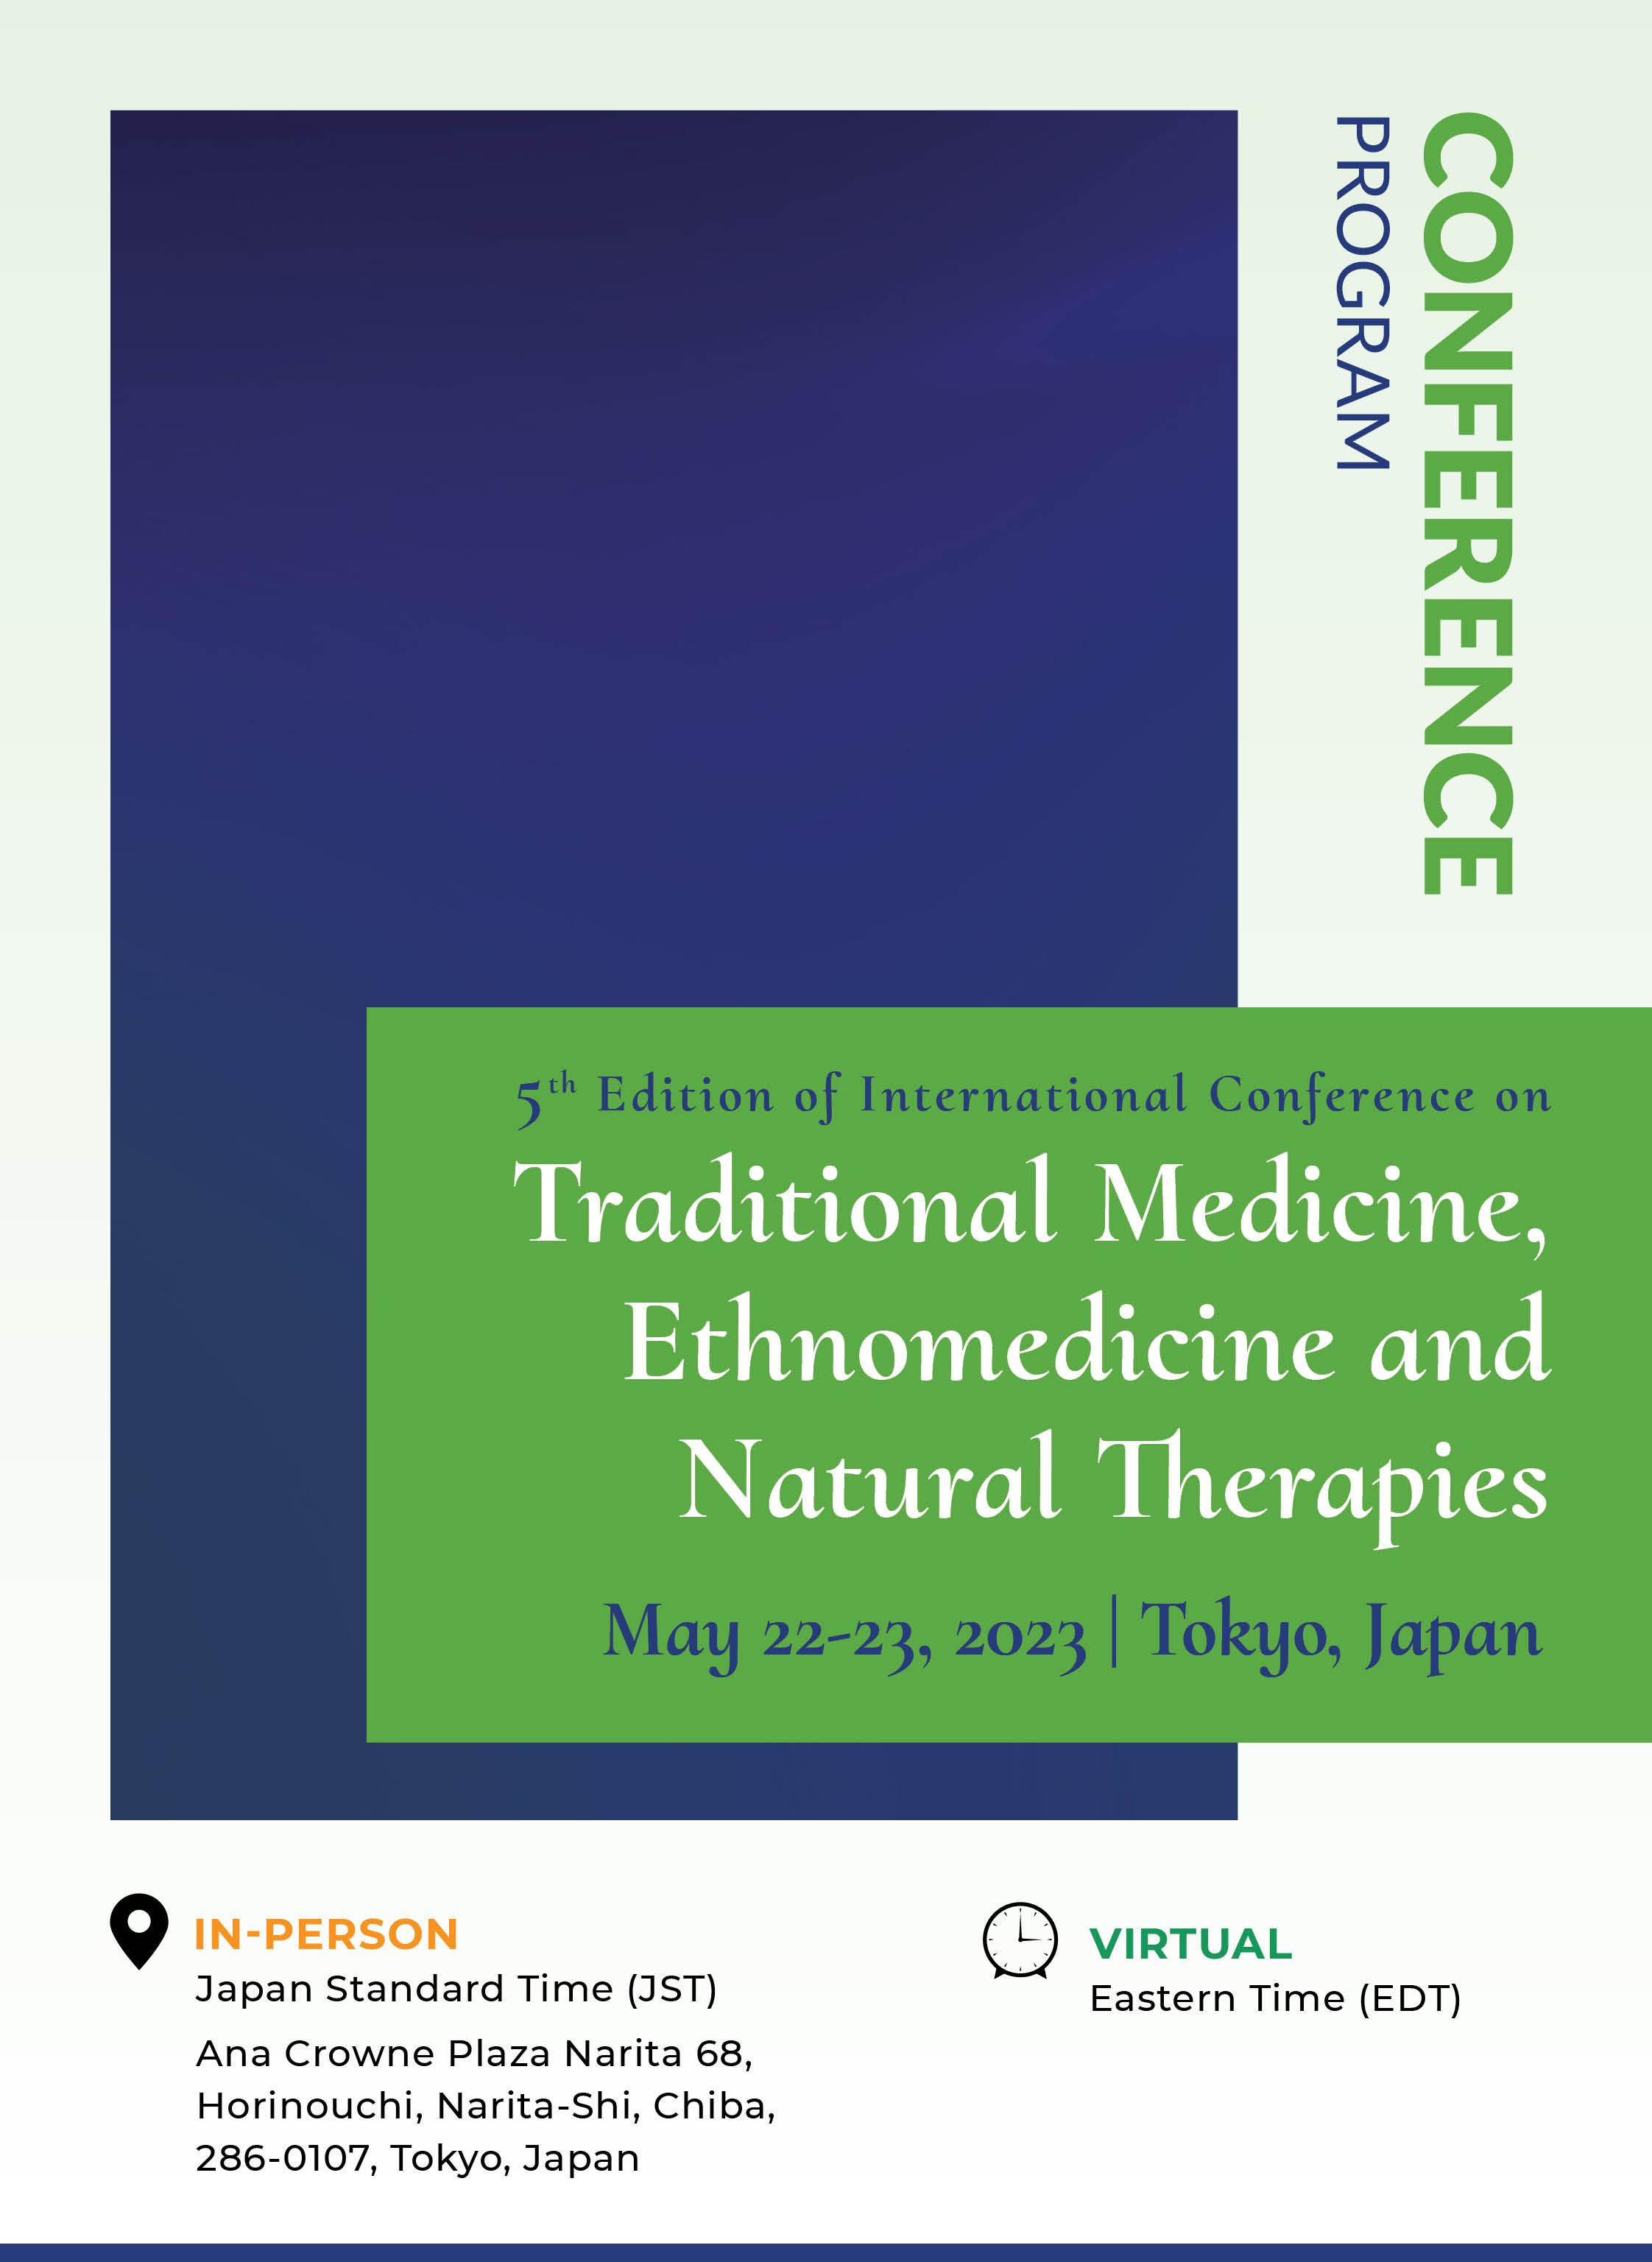 5th Edition of International Conference on Traditional Medicine, Ethnomedicine and Natural Therapies | Tokyo, Japan Program